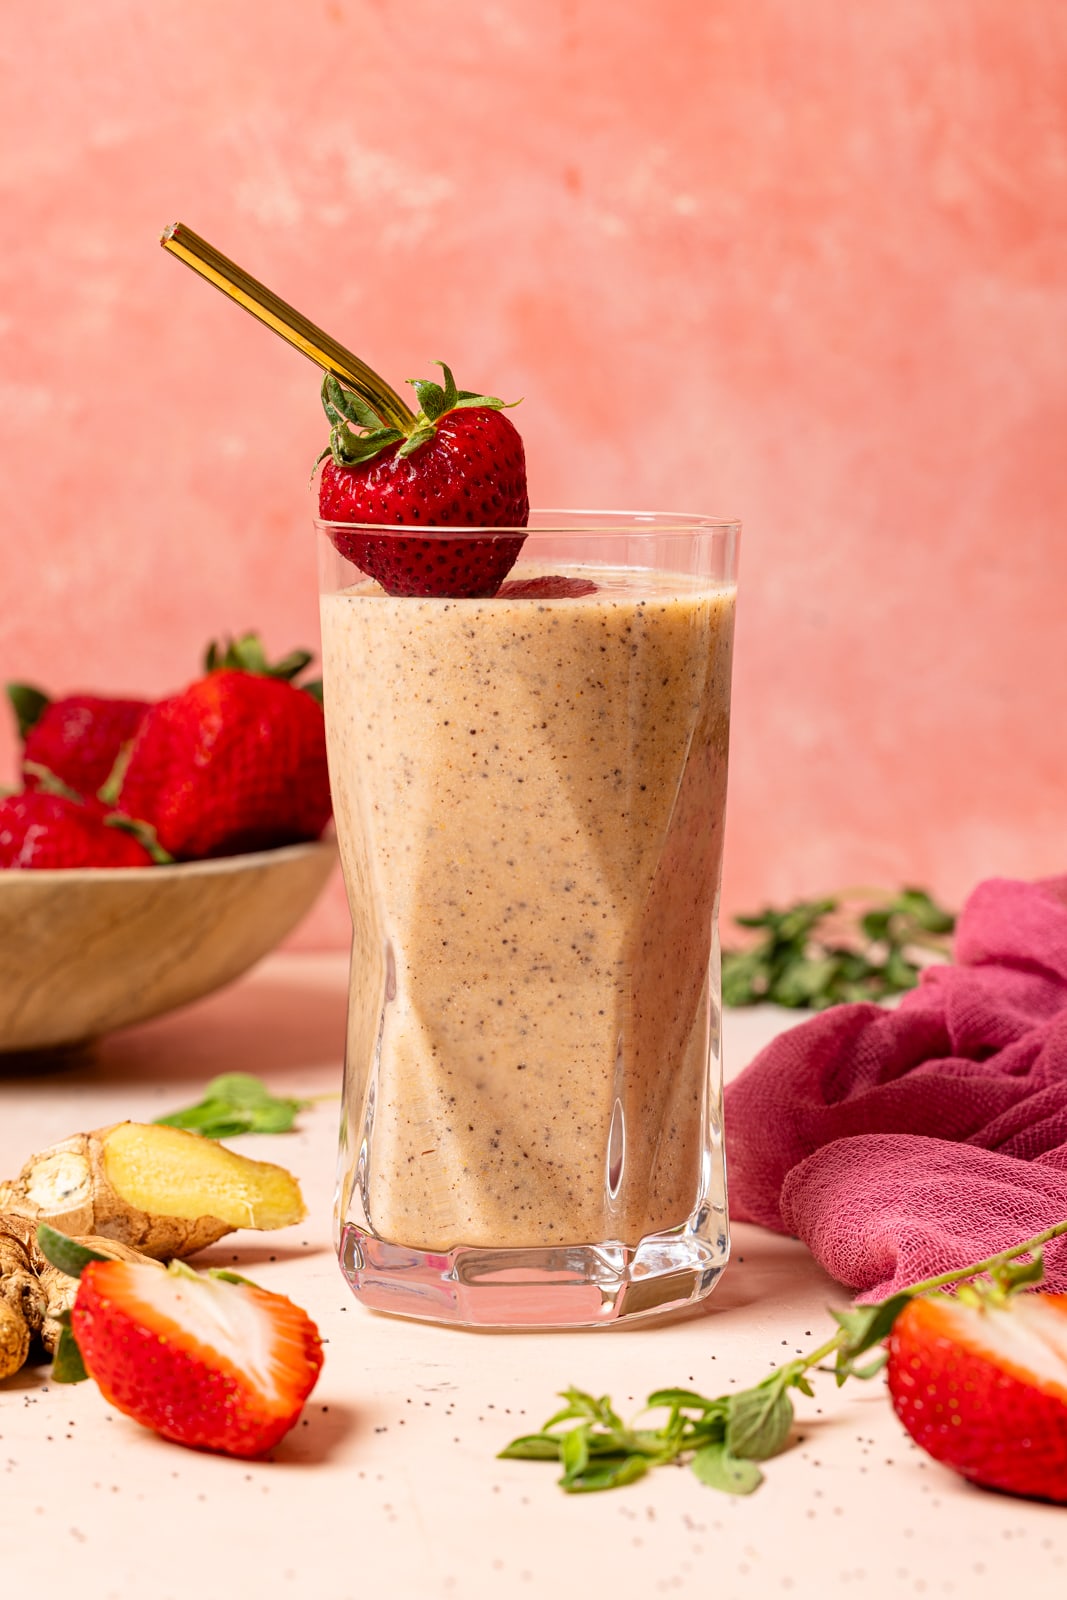 https://www.orchidsandsweettea.com/wp-content/uploads/2019/06/Strawberry-Banana-Smoothie-7.jpg